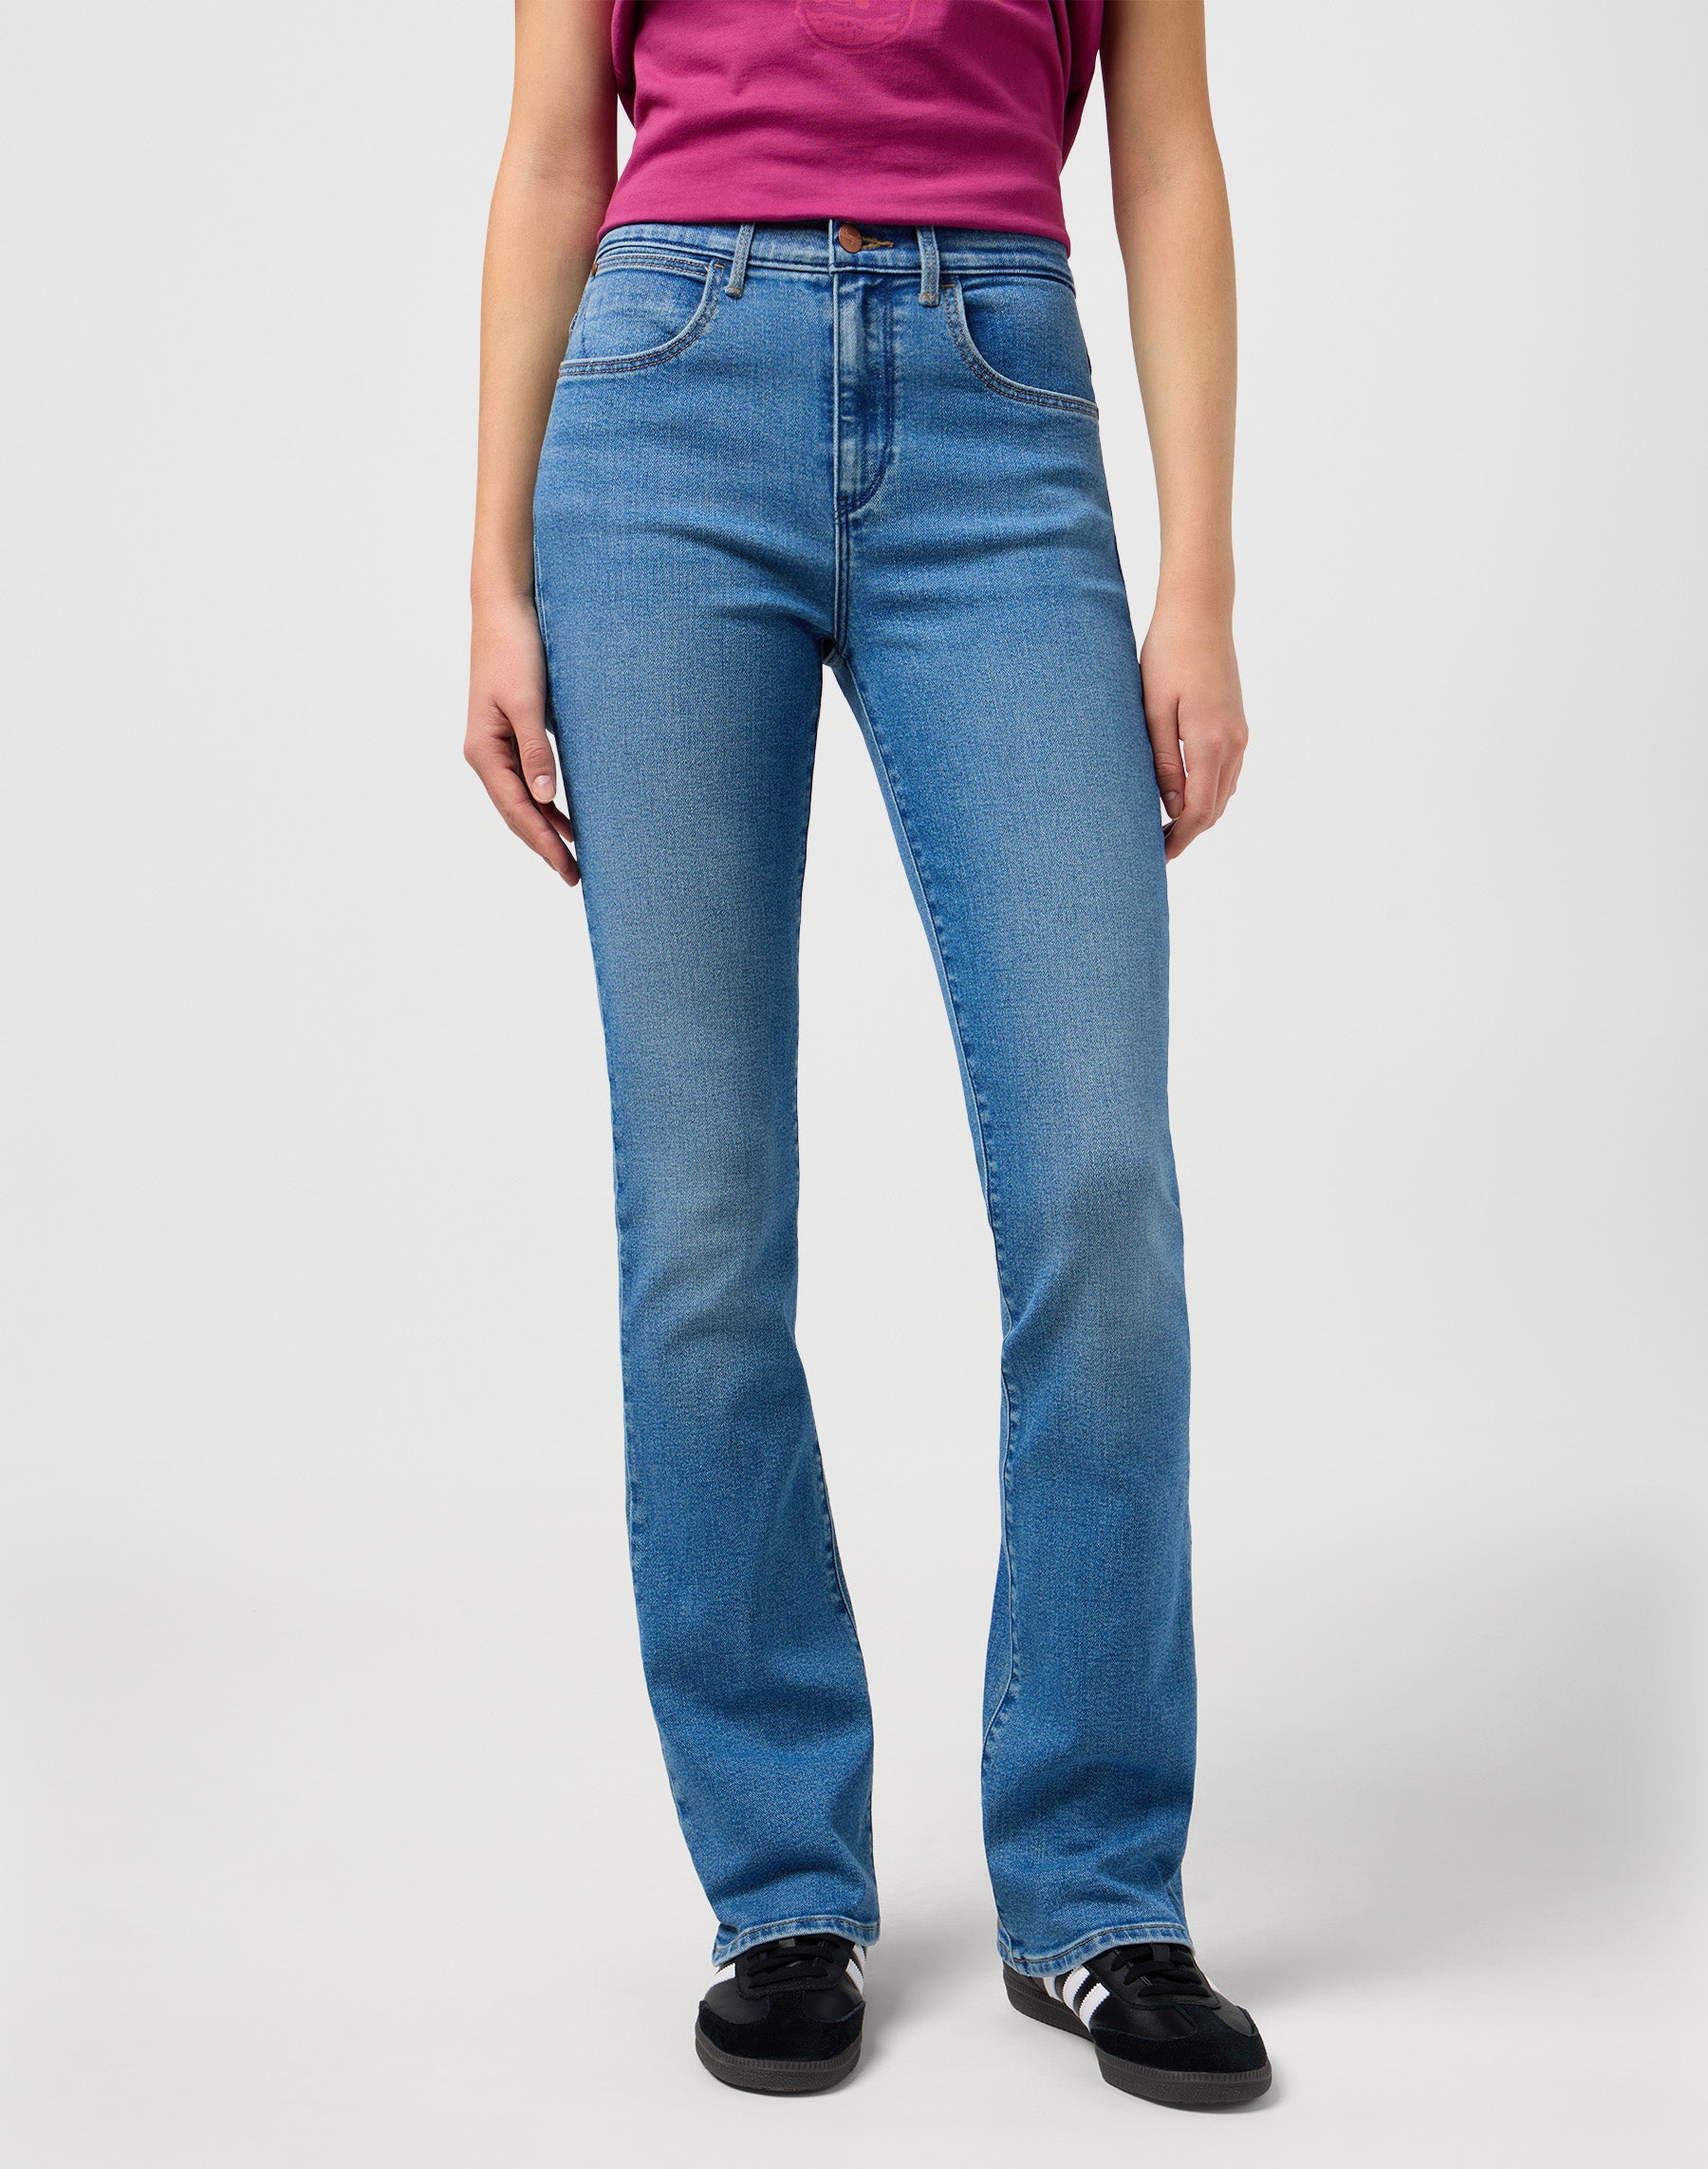 Bootcut in Peaceful Jeans Wrangler   